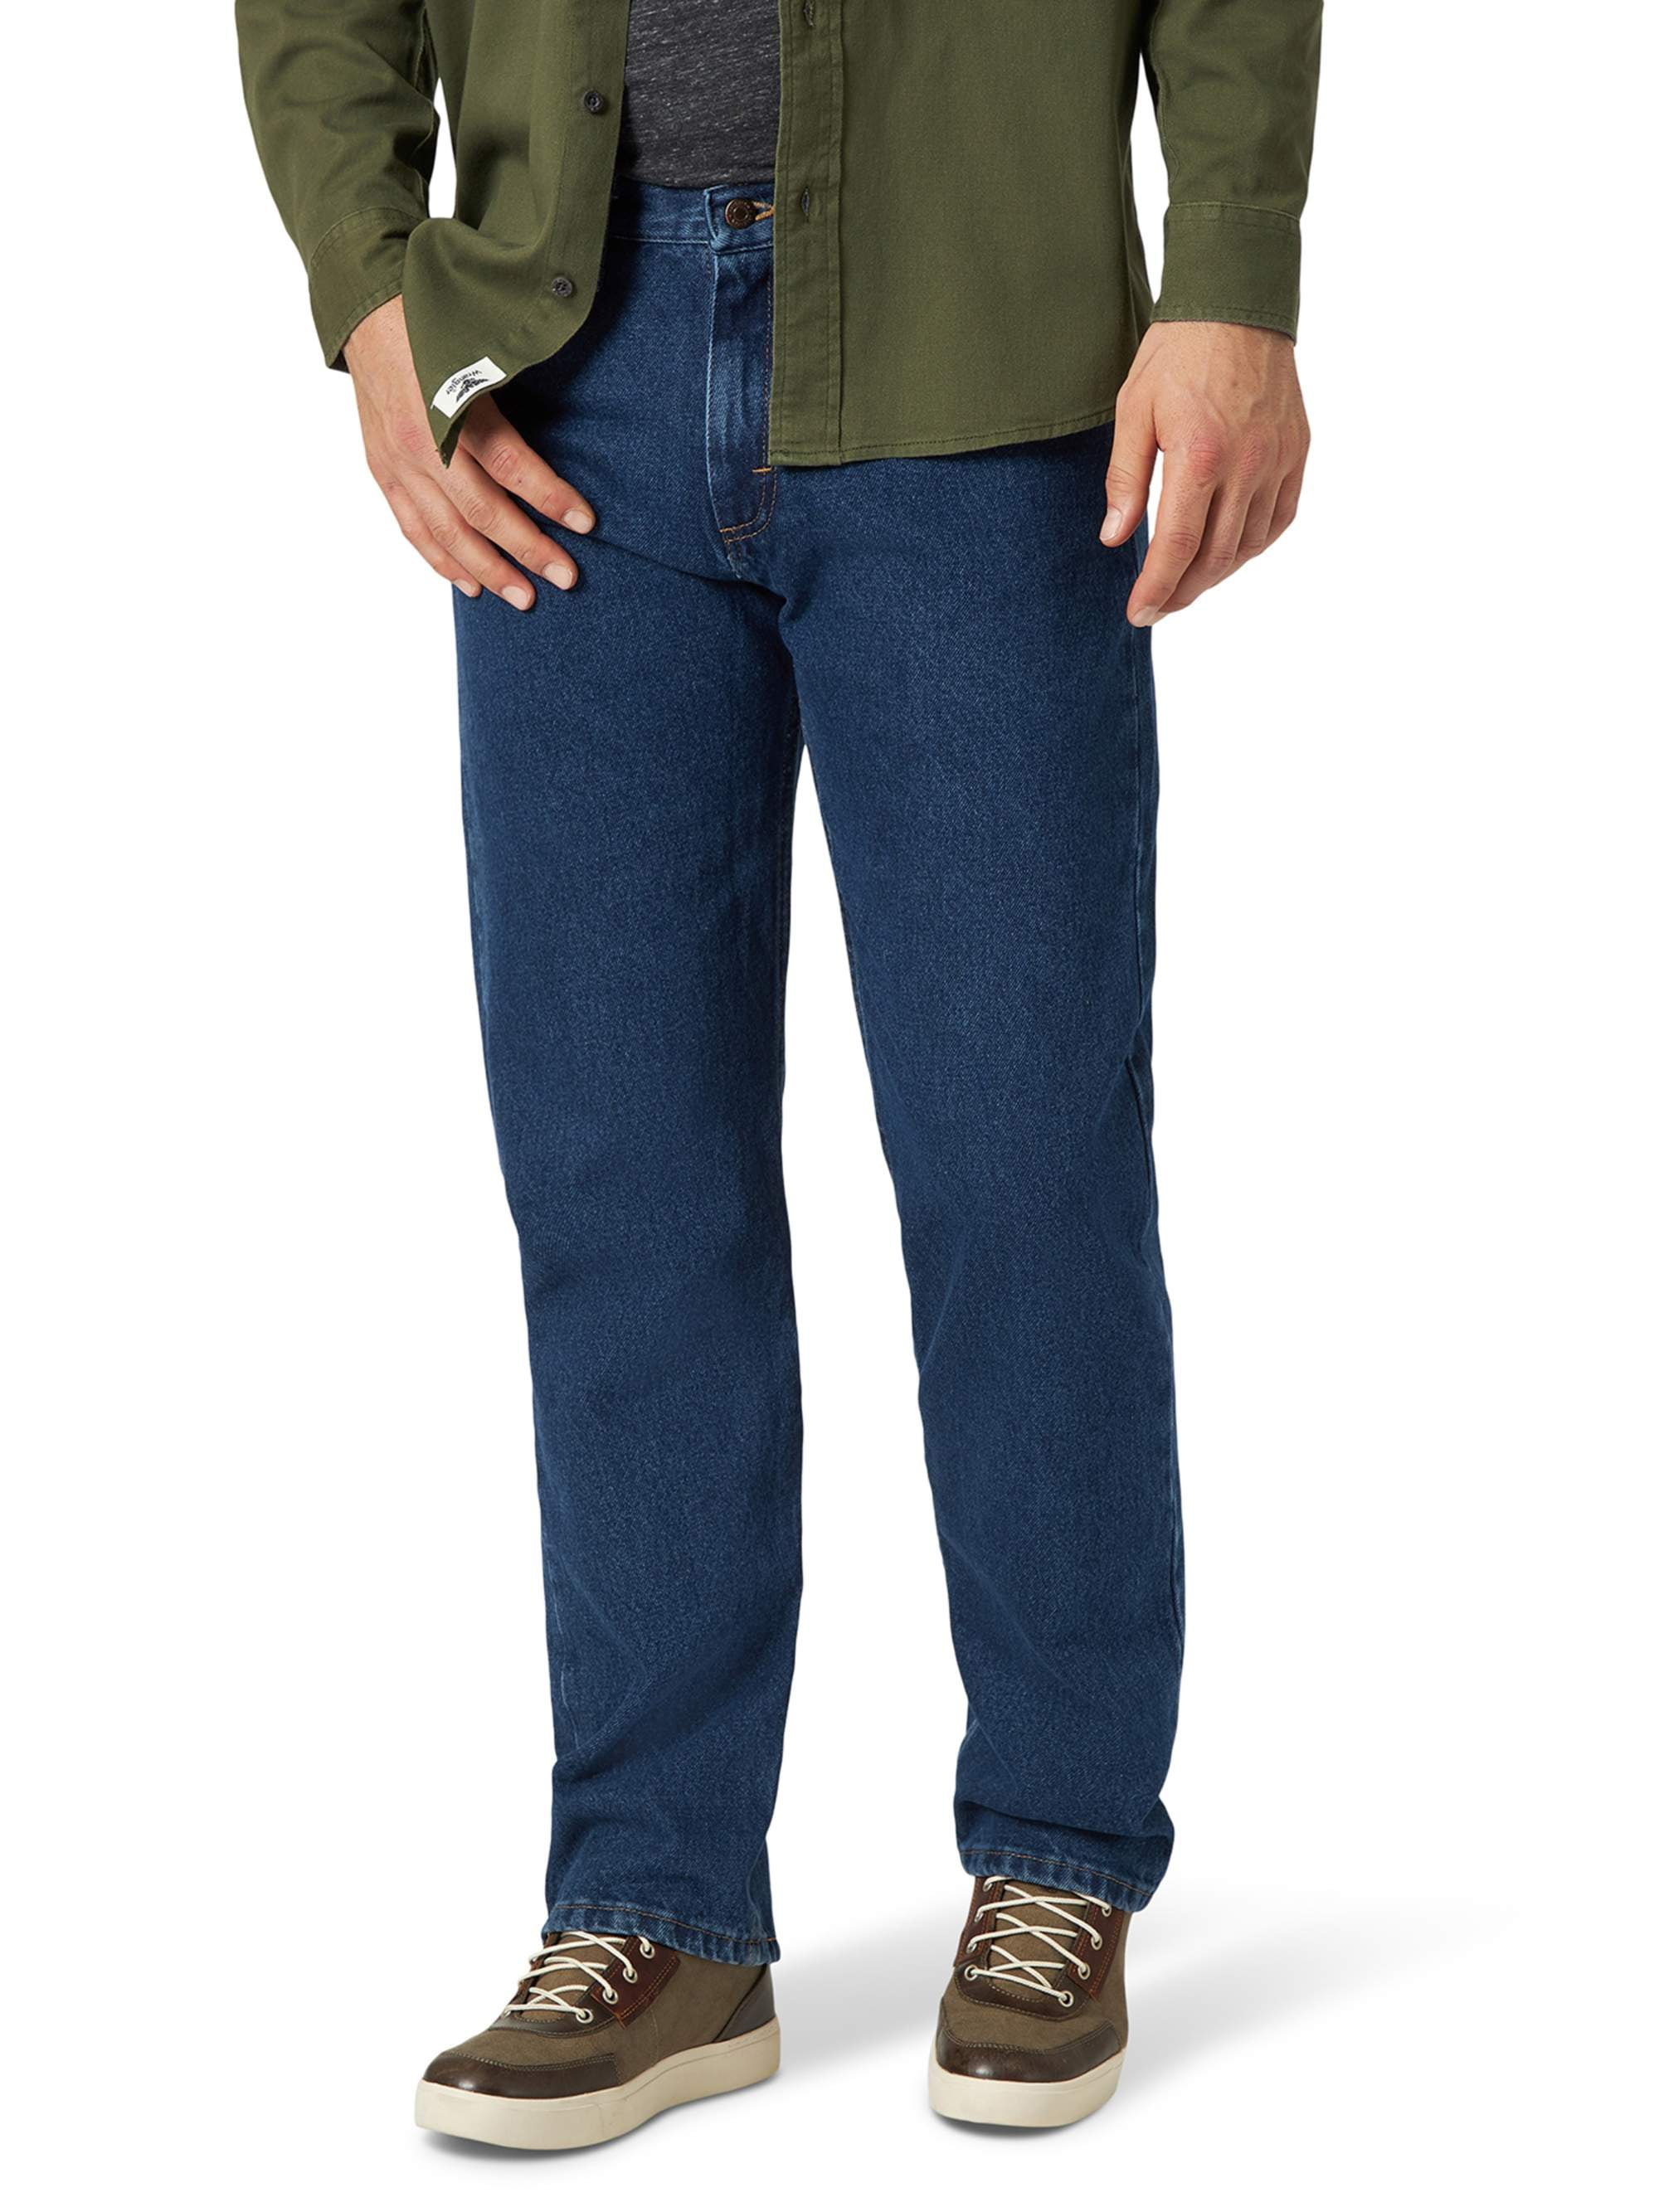 wrangler relaxed fit jeans walmart